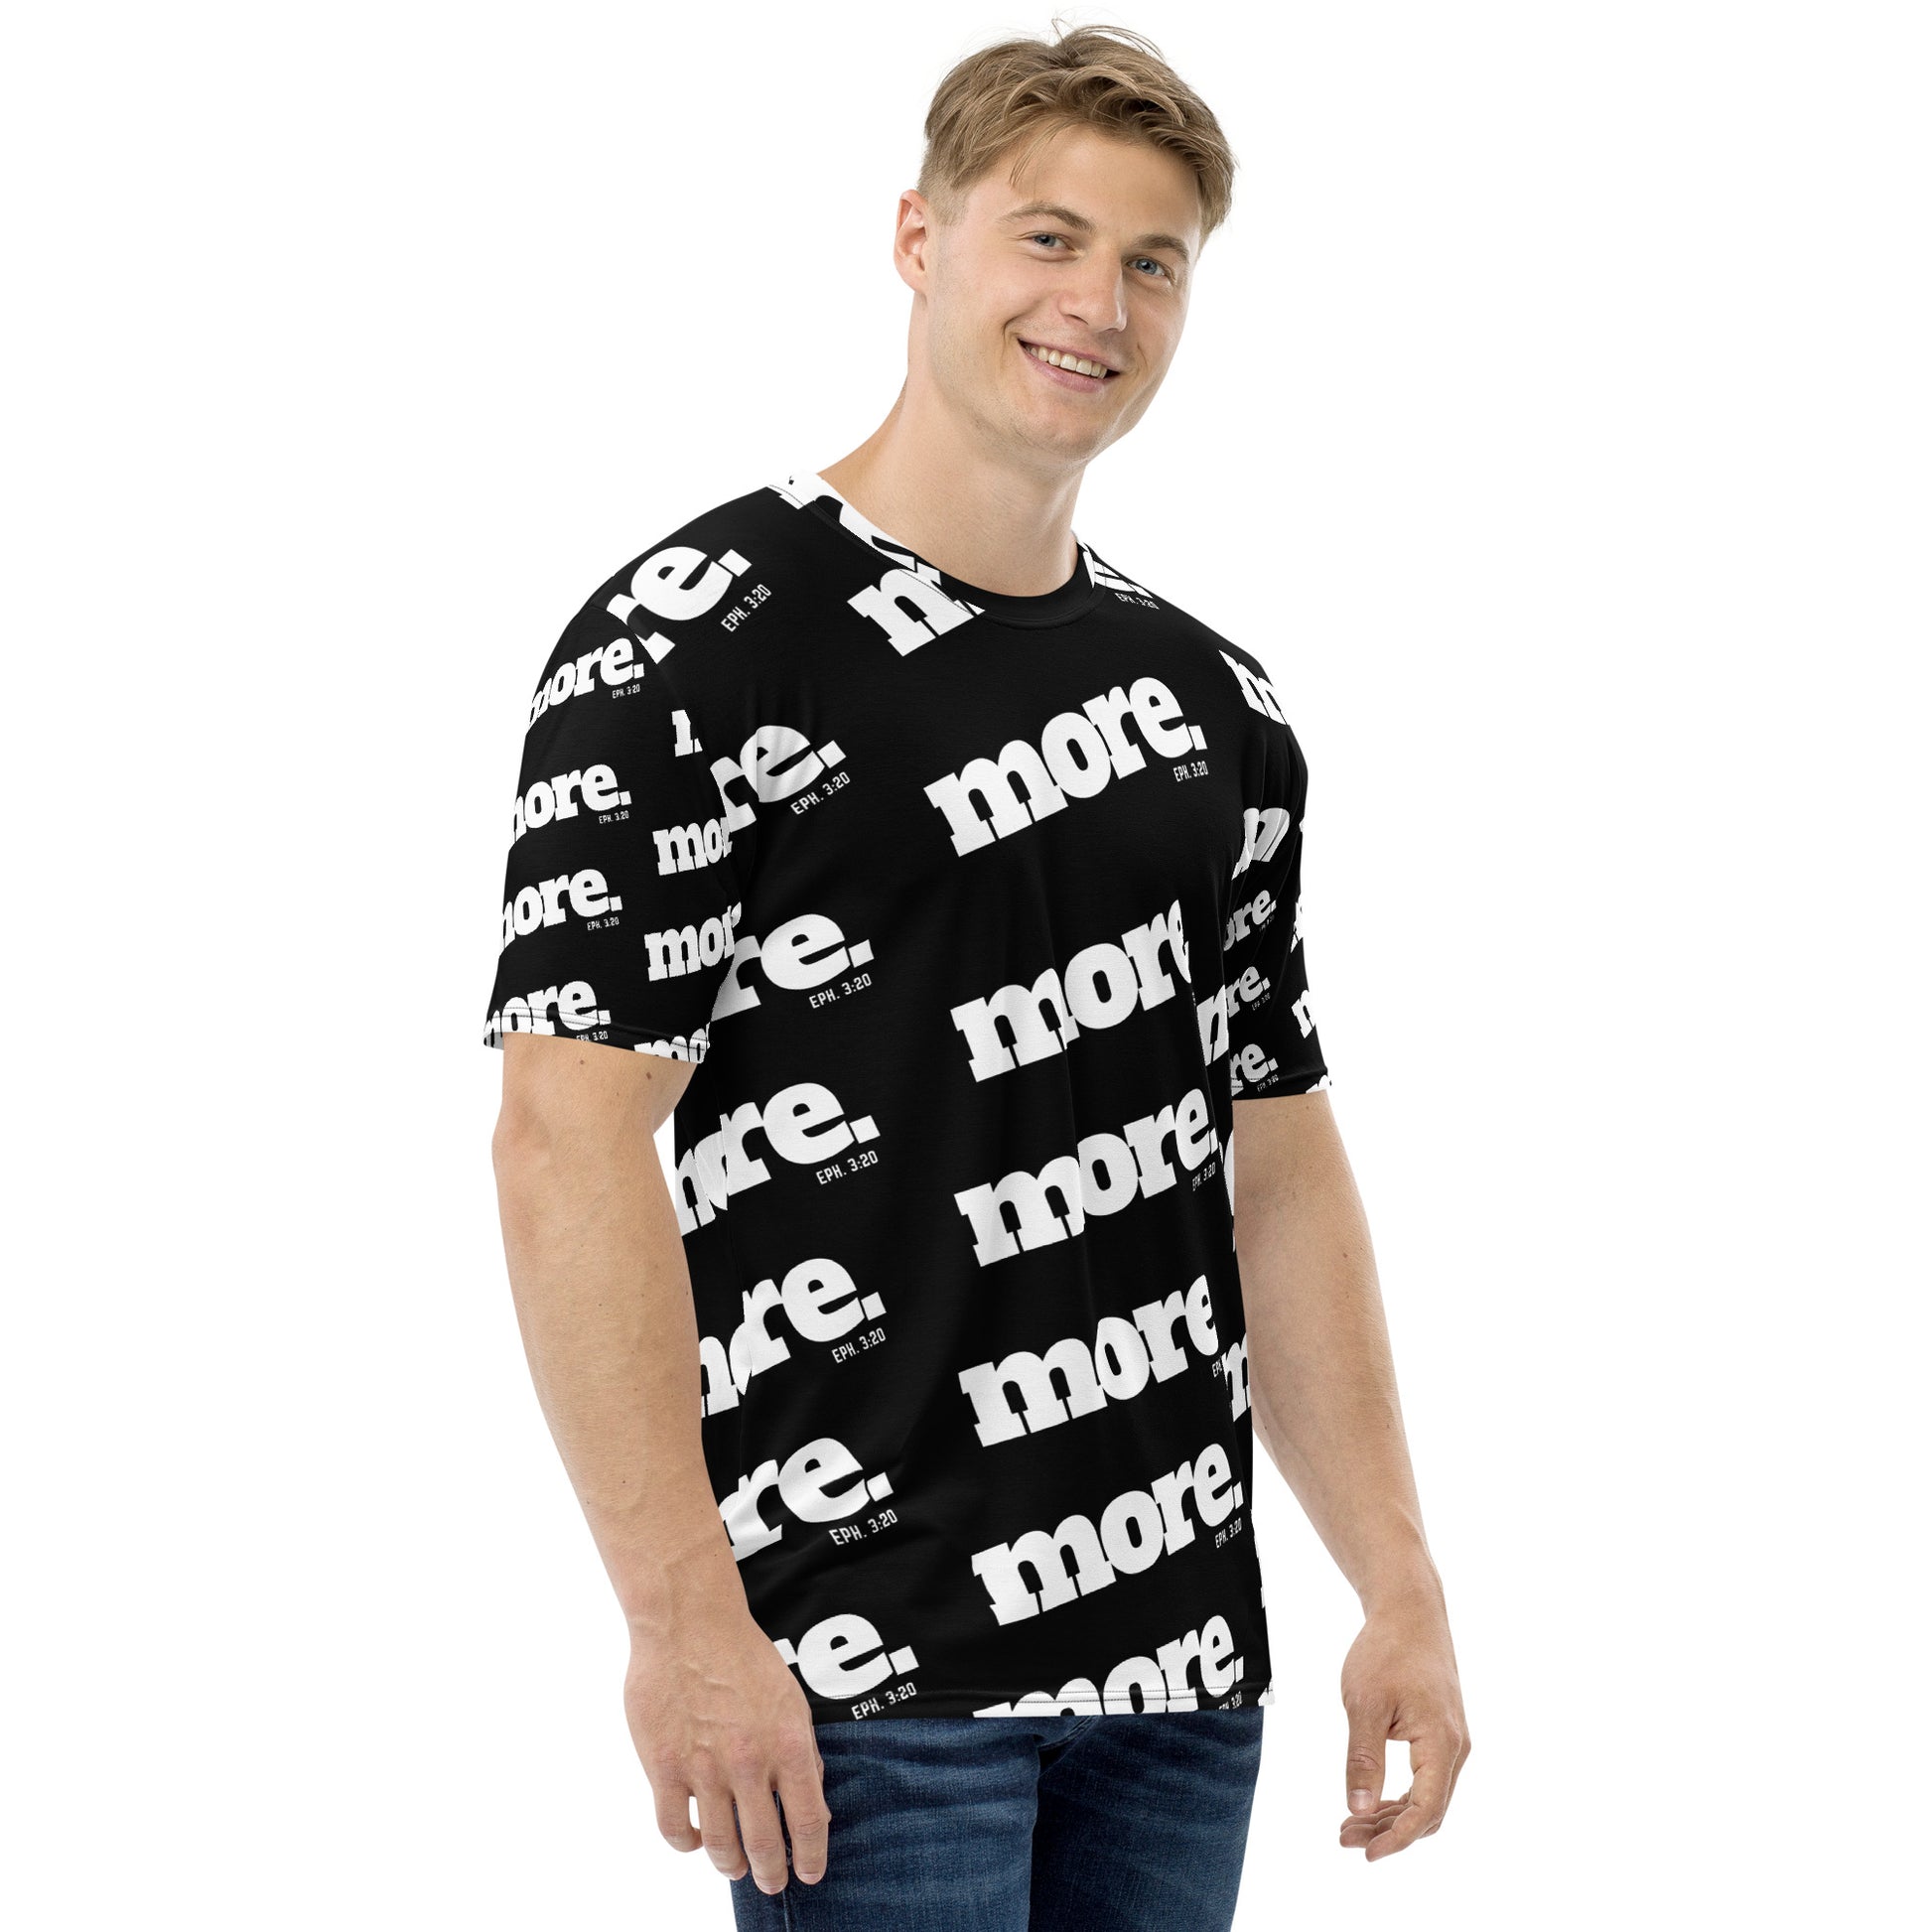 MORE Men's Print All-Over T-shirt - Beyond The Walls Int'l